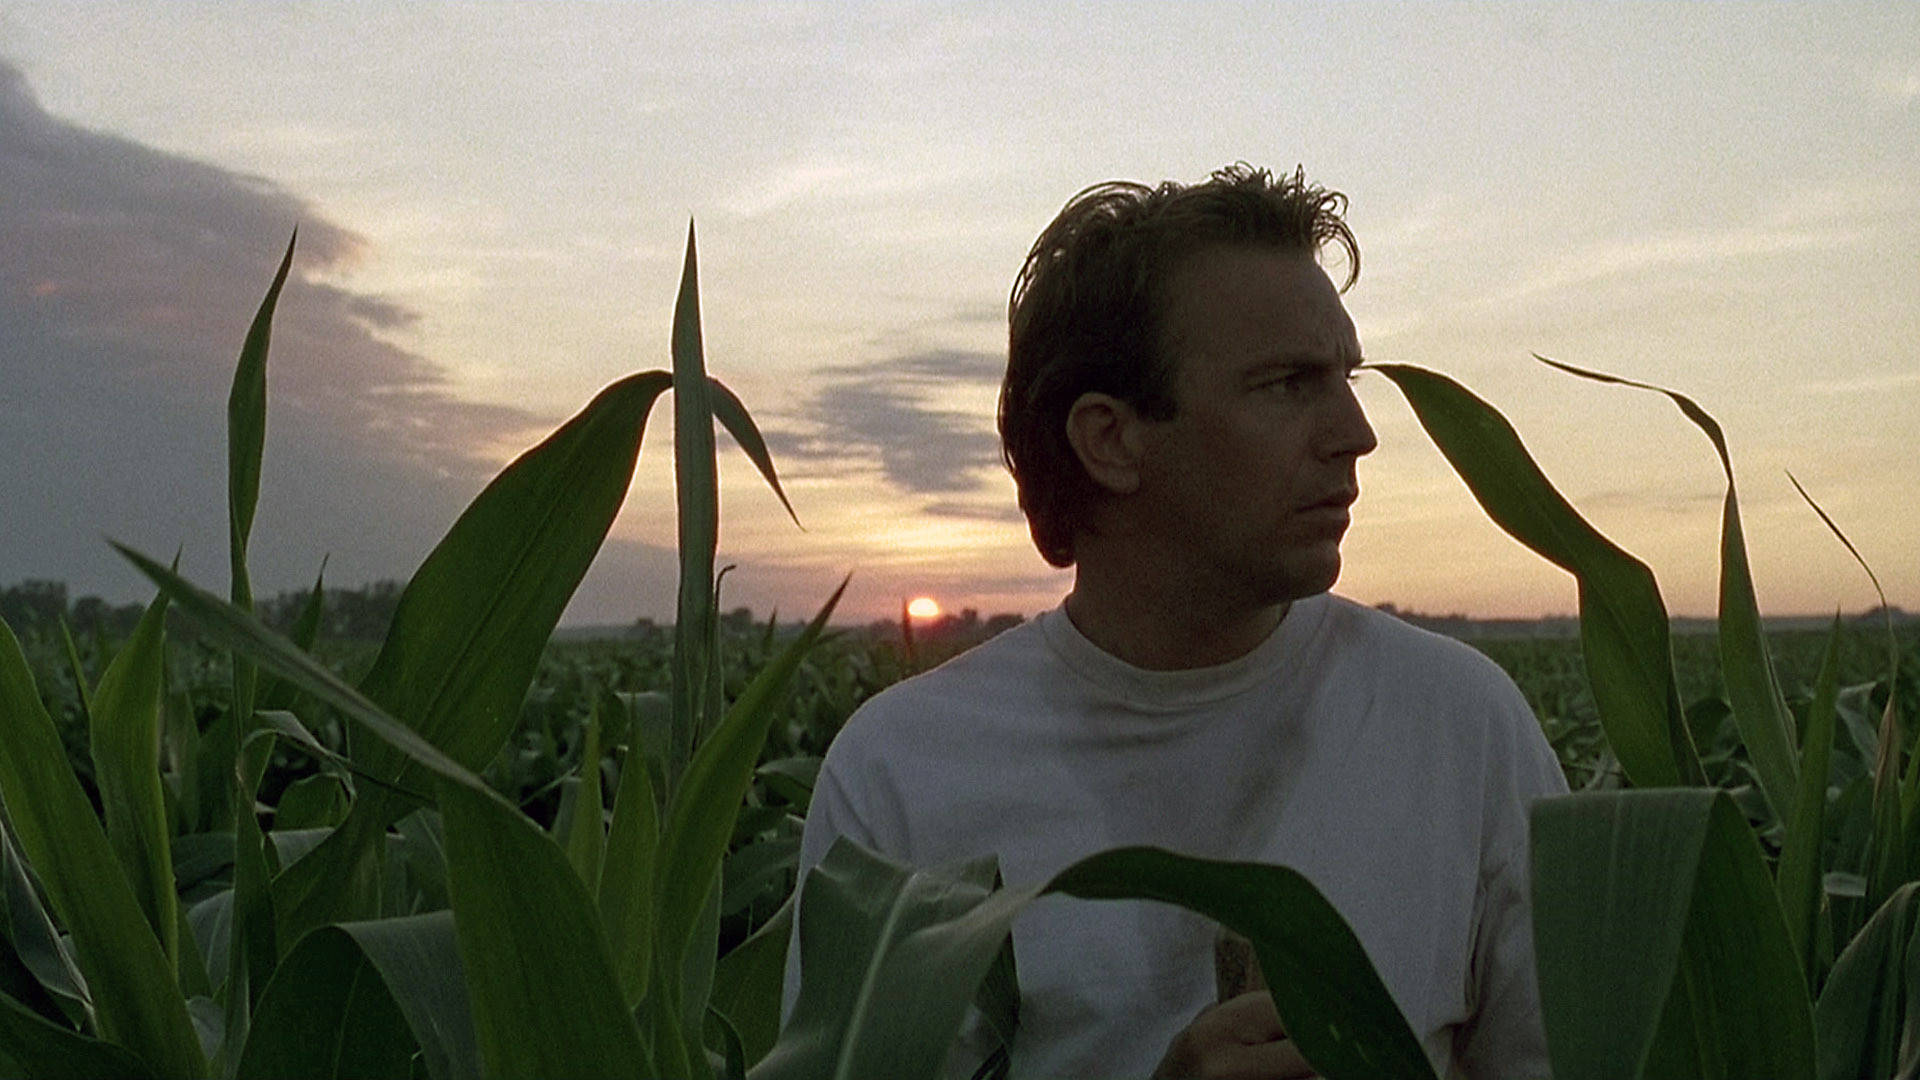 Kevin Costner hears a whisper: “If you build it, he will come.” Still from <i>Field of Dreams</i>, directed by Phil Alden Robinson, 1989.